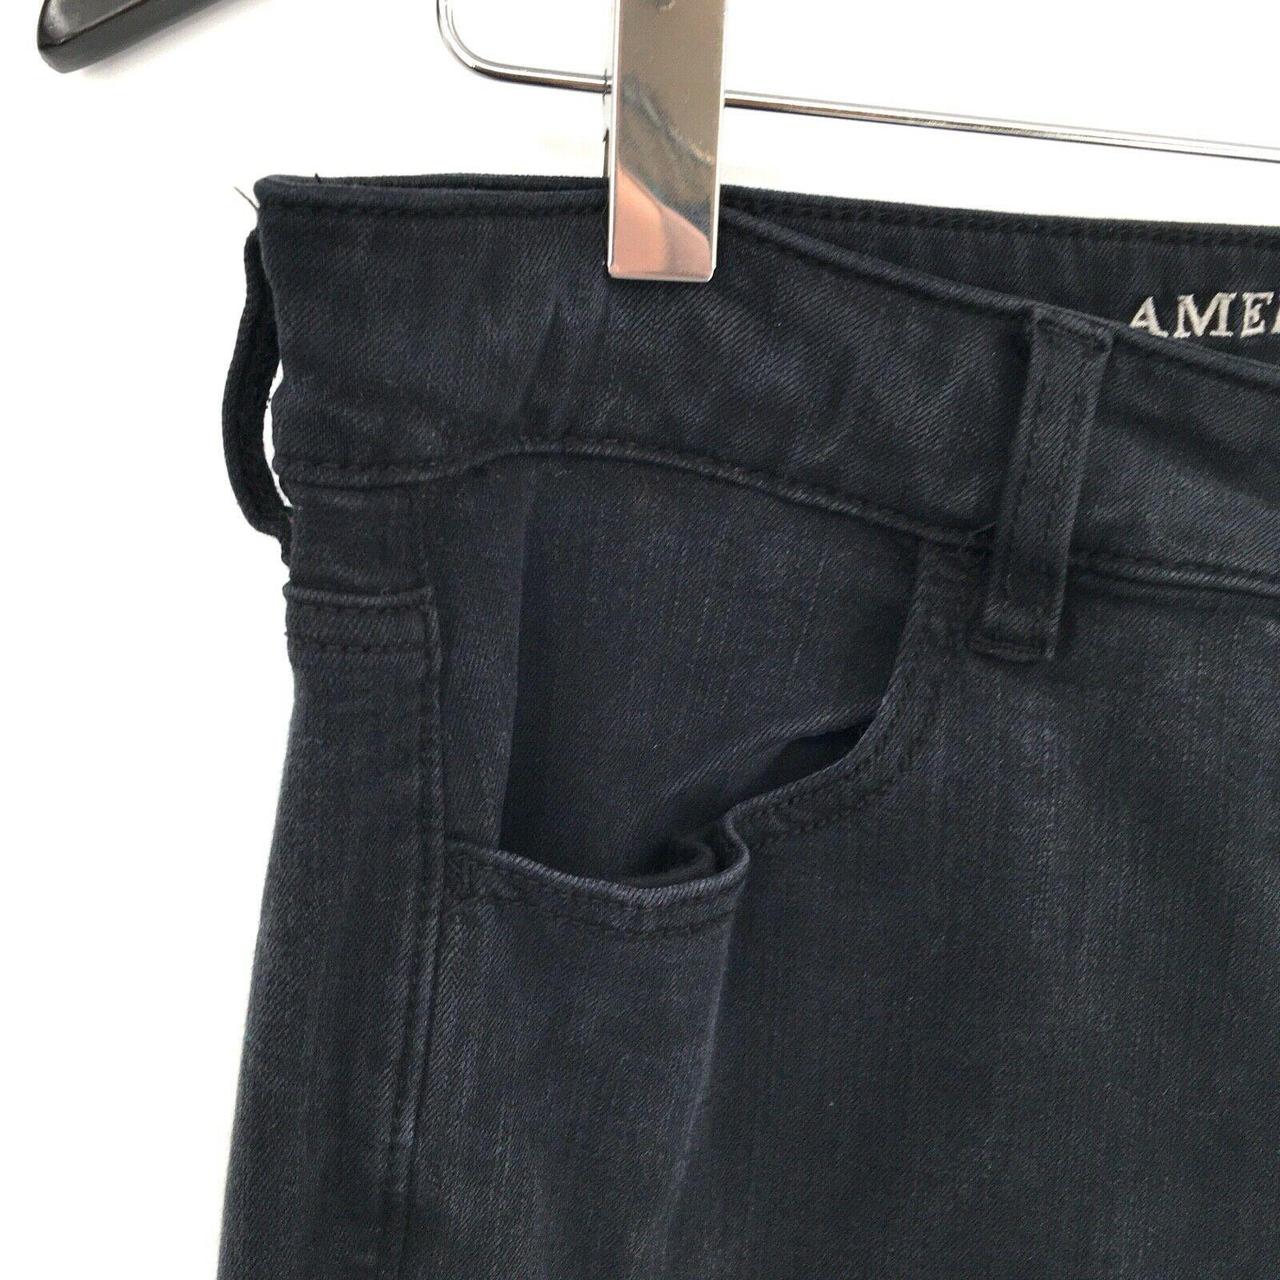 Product Image 2 - American Eagle outfitters AEO Hi-Rise